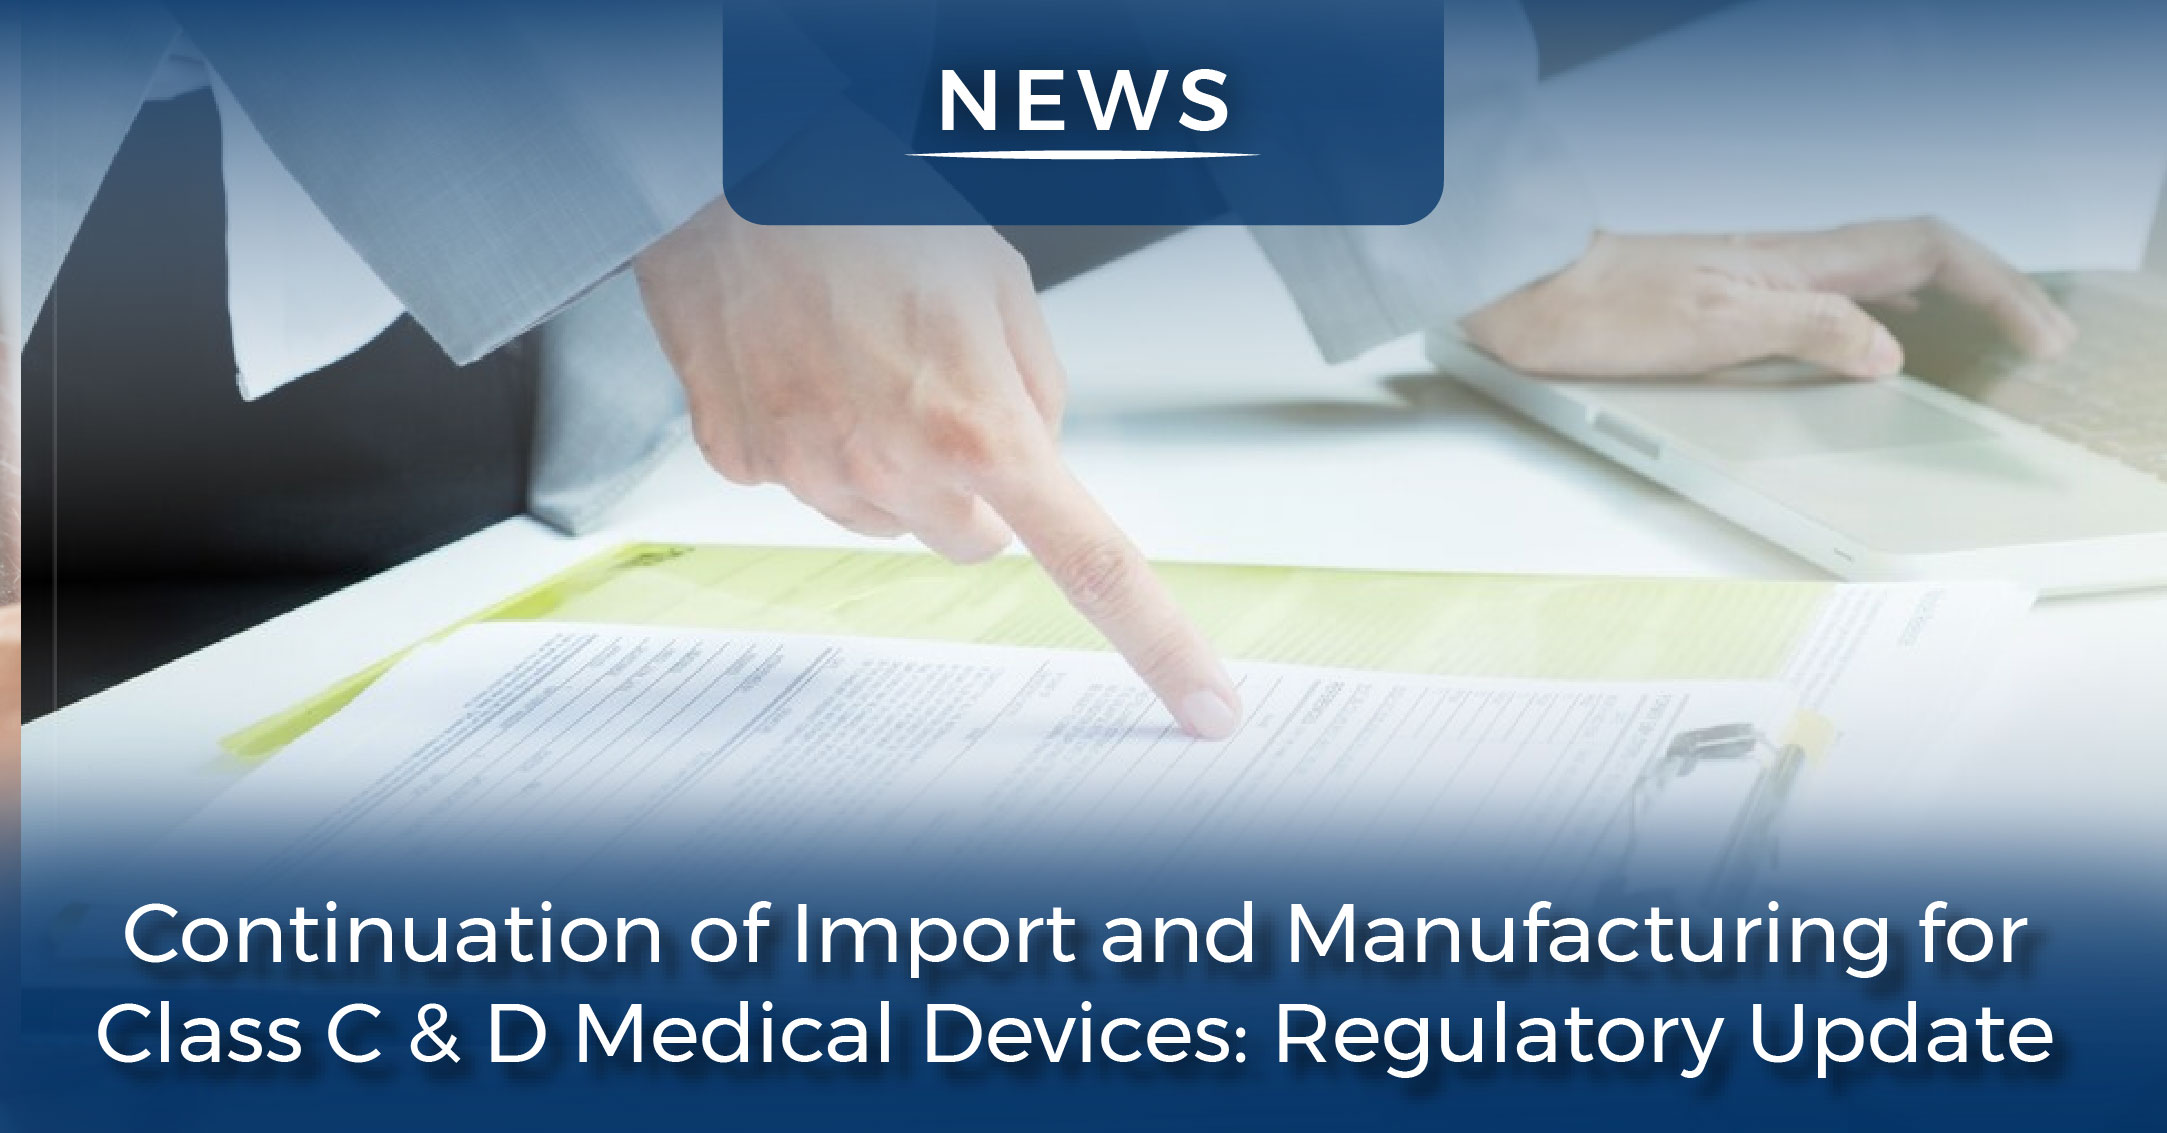 Continuation of Import and Manufacturing for Class C & D Medical Devices: Regulatory Update